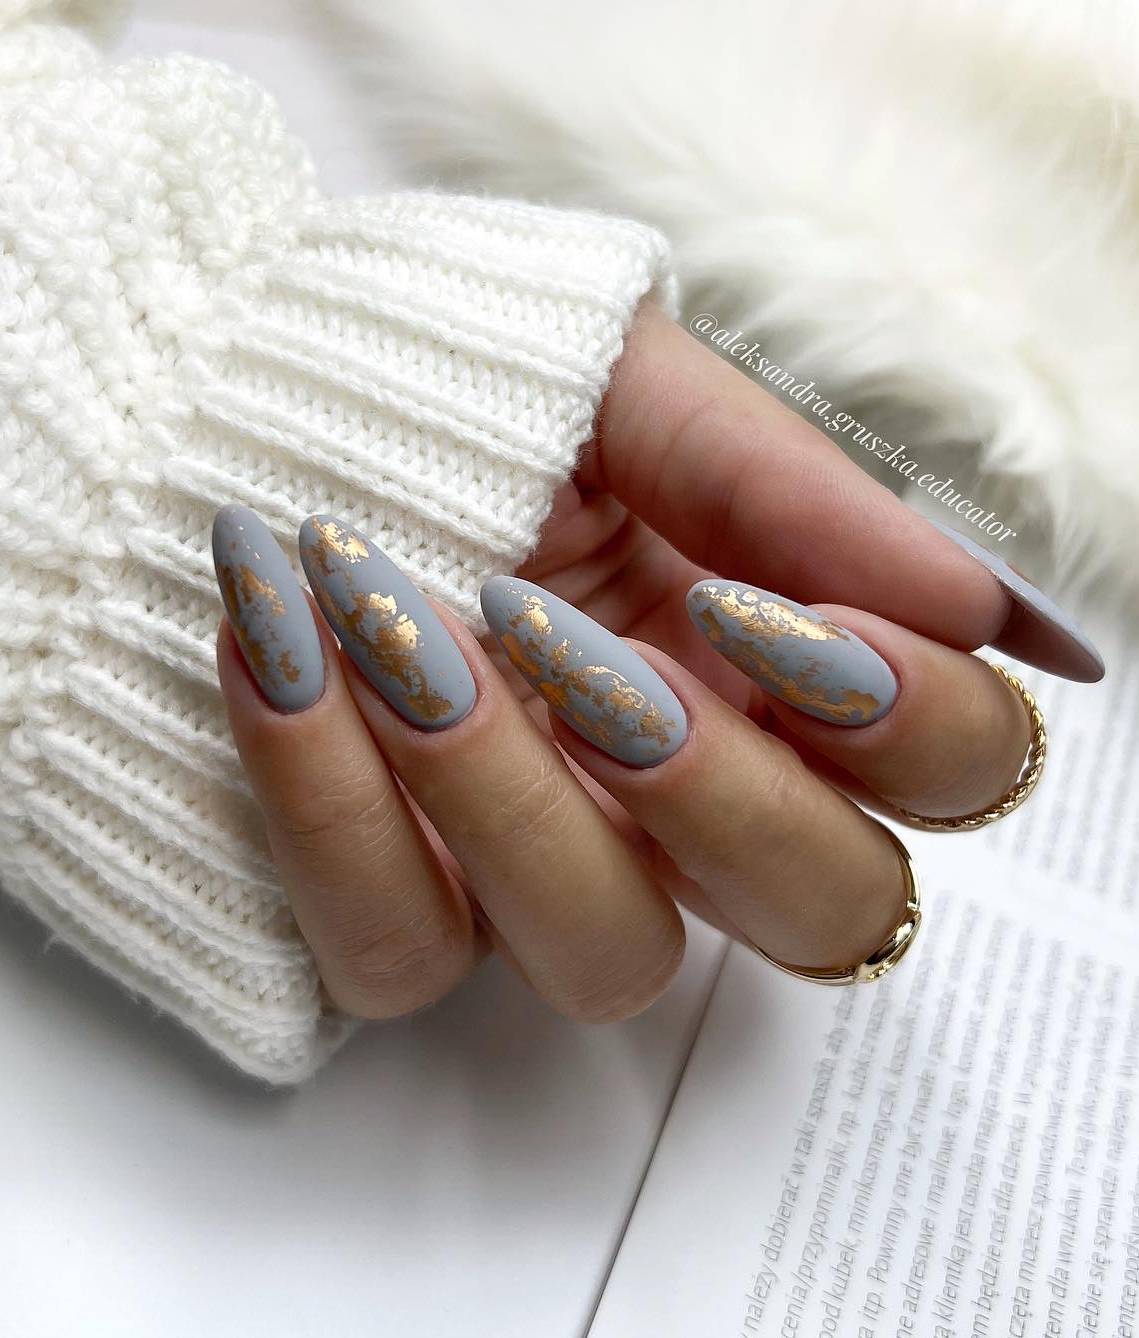 Matte Gray Nails with Gold Foil Design